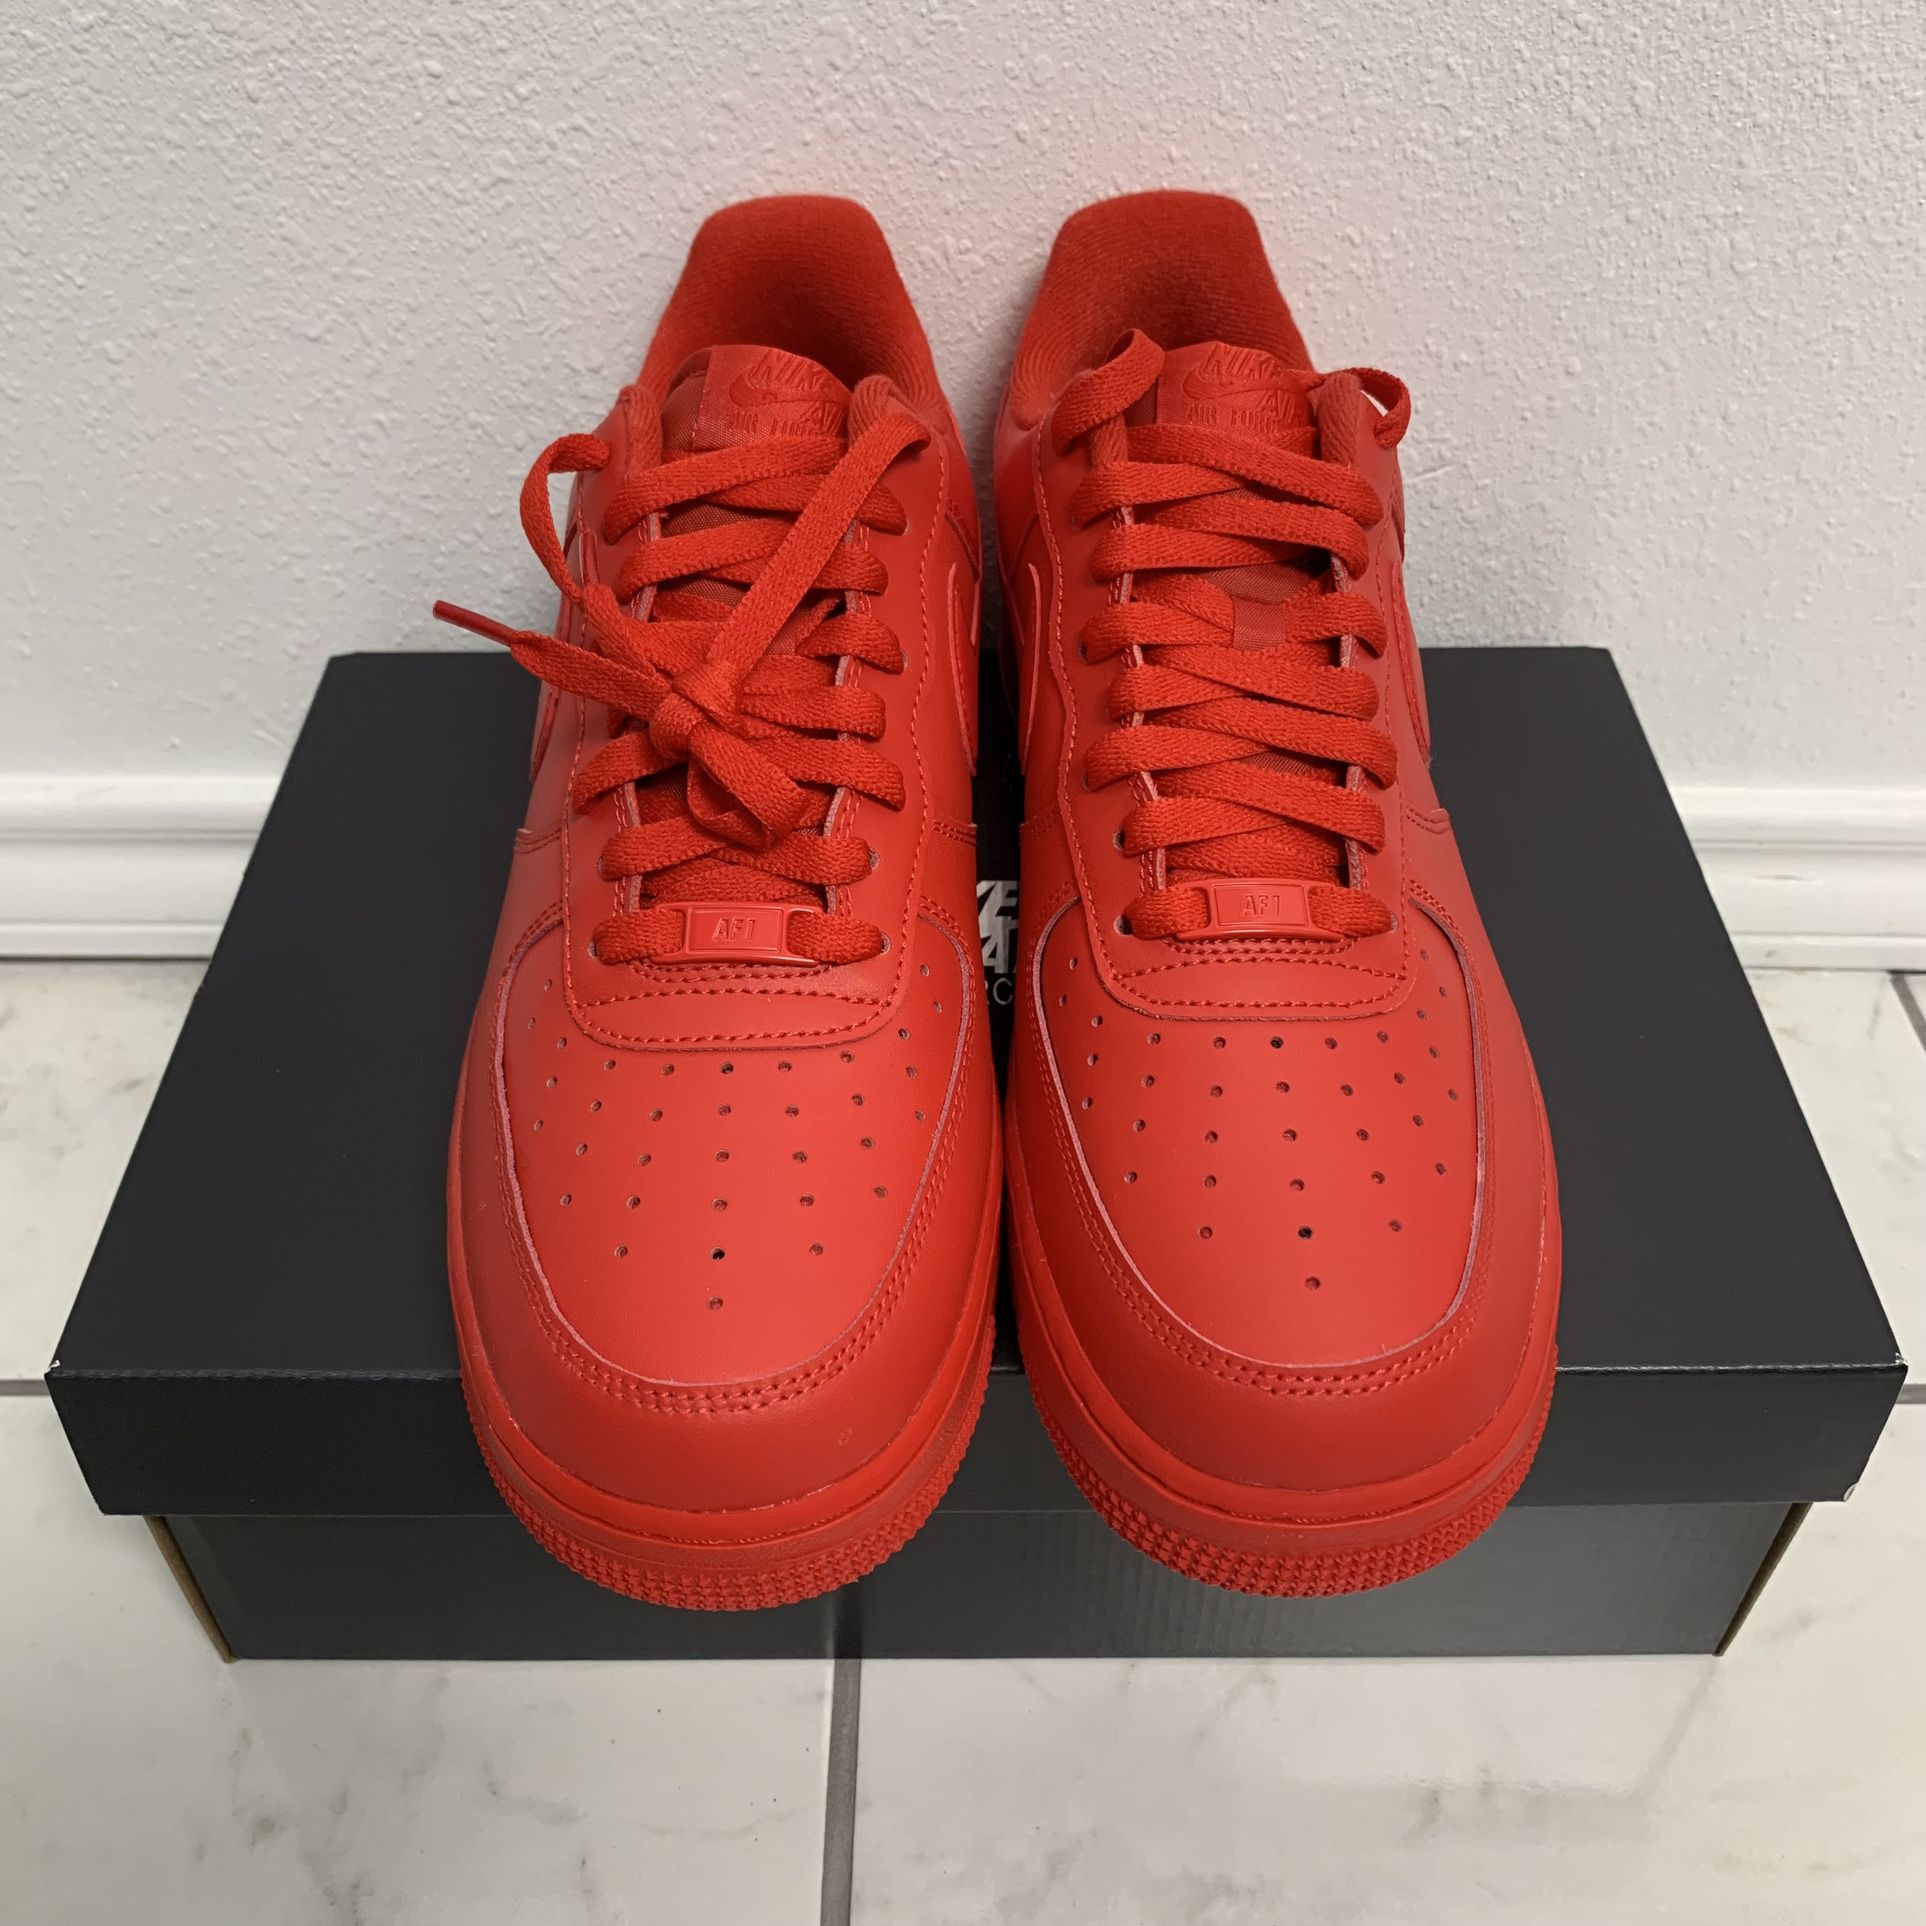 Nike Air Force 1 Low '07 LV8 1 'Triple Red' 9